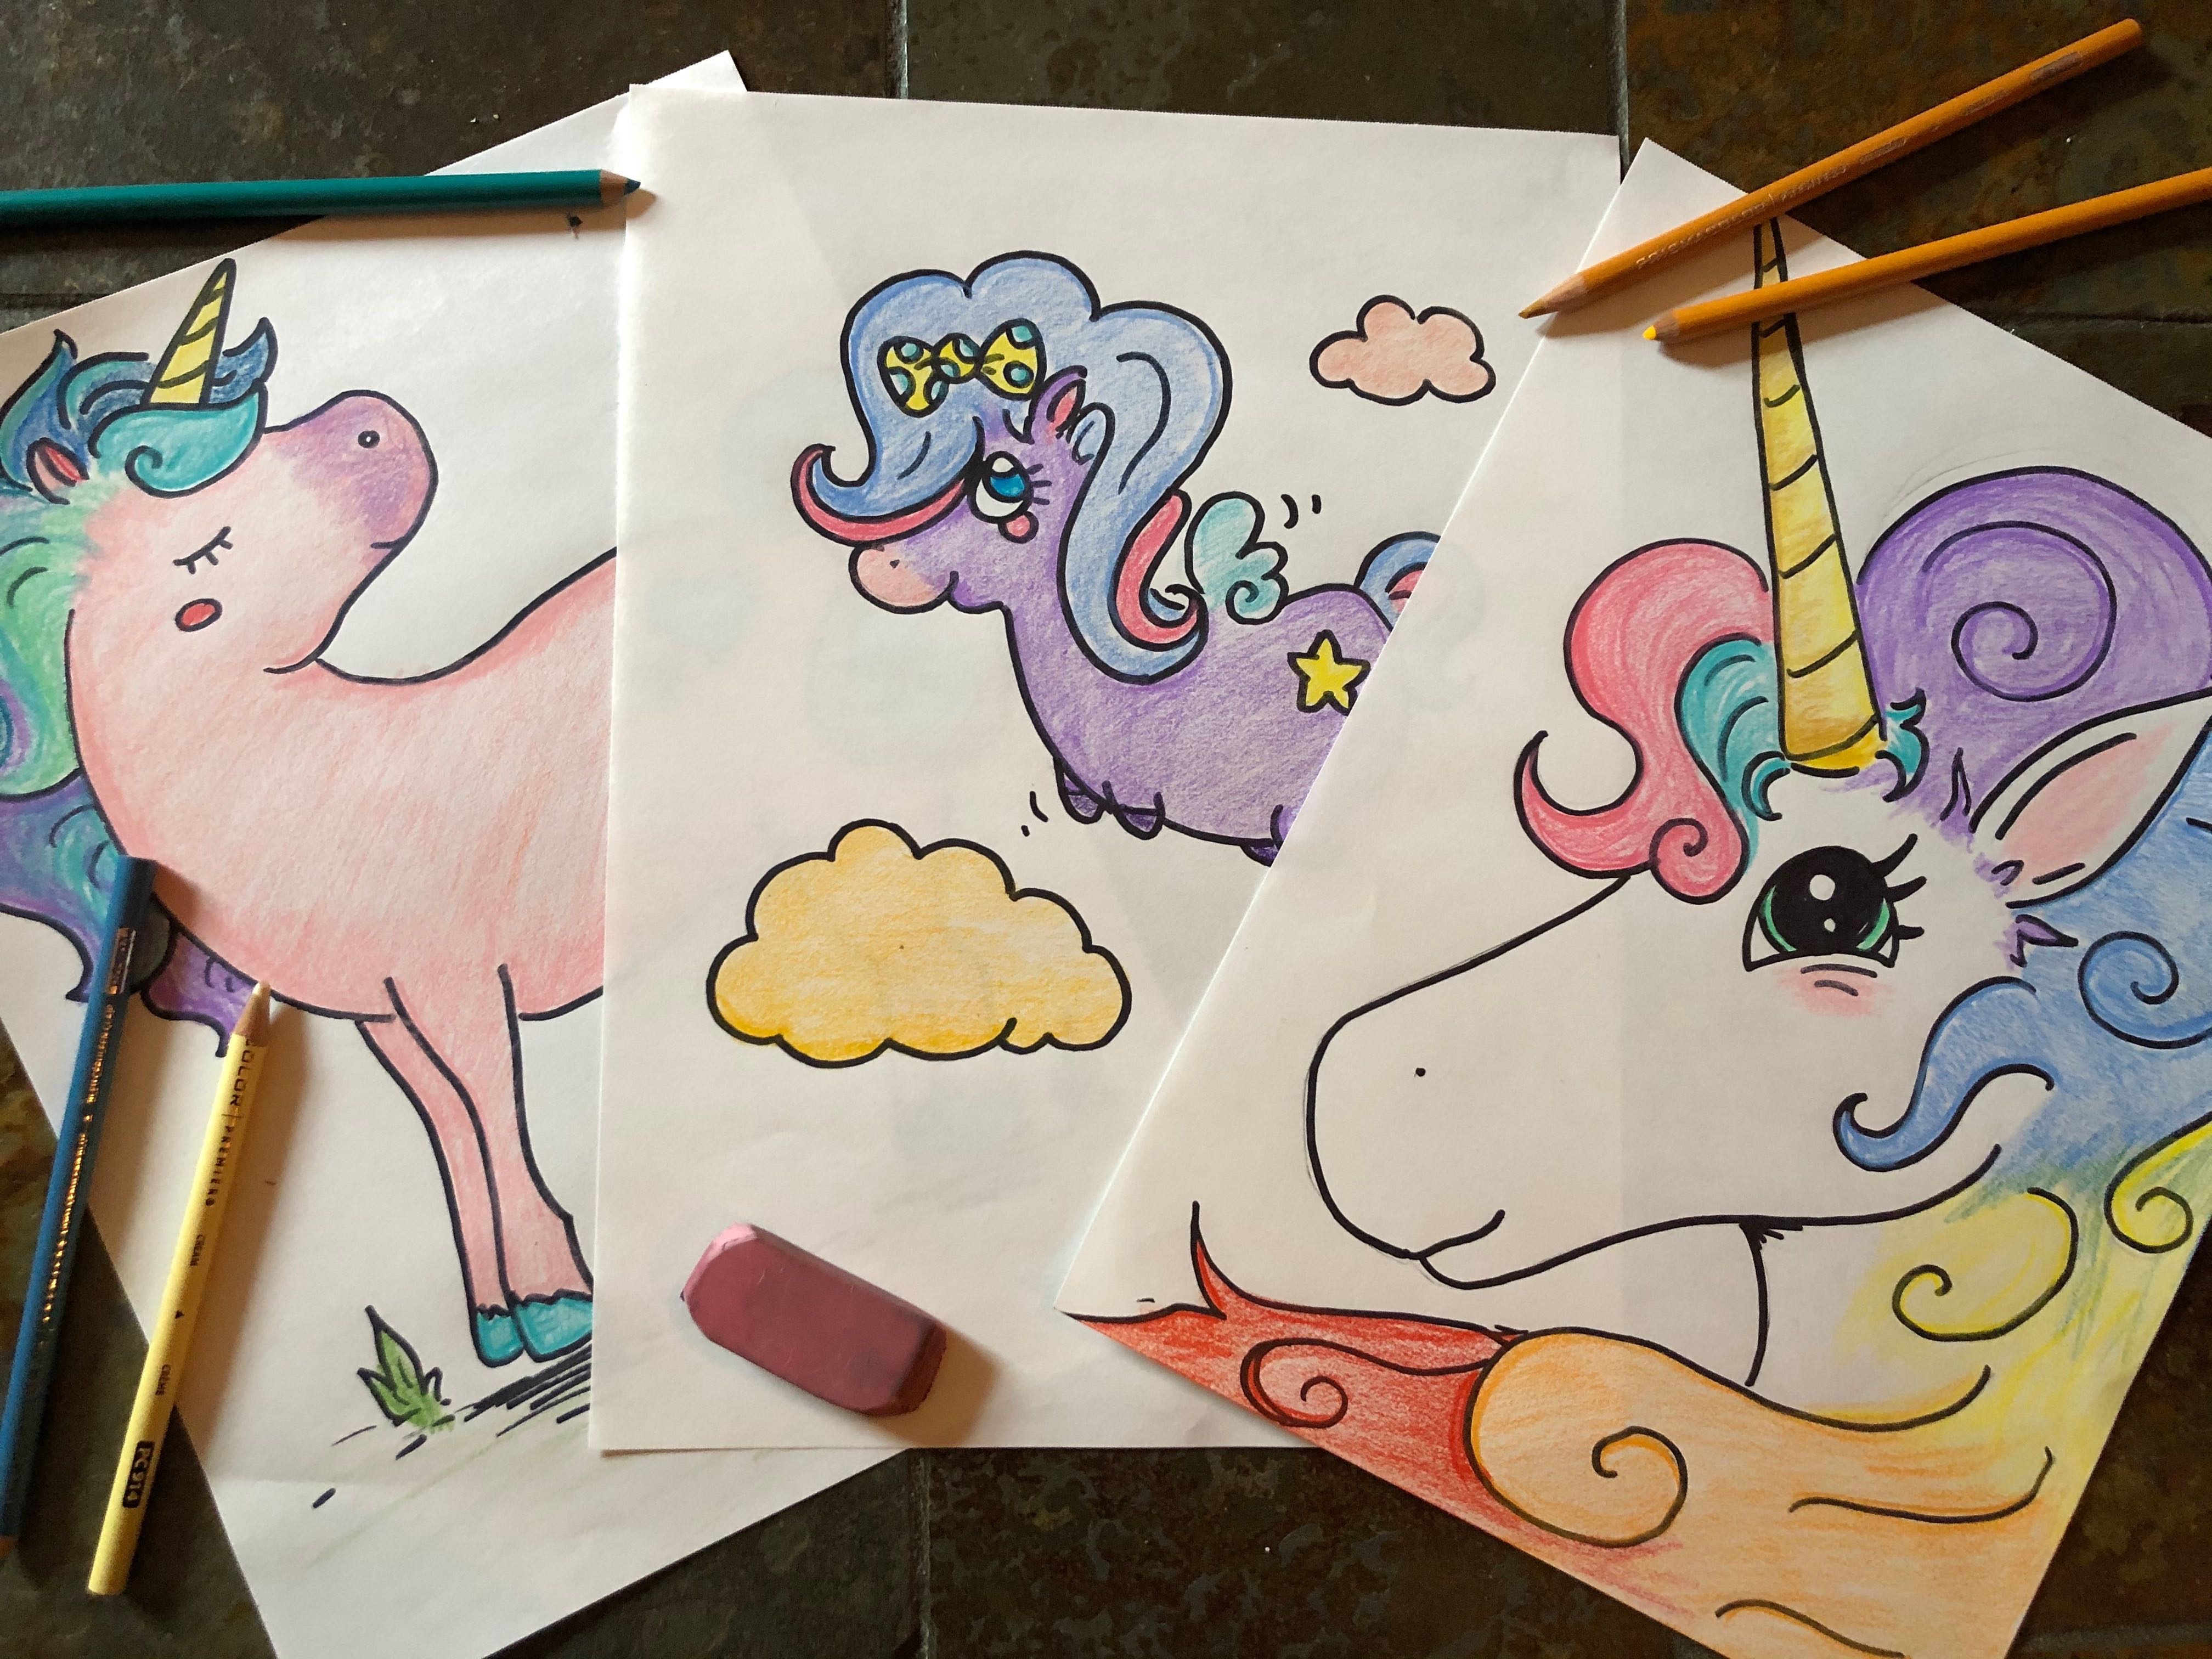 A Virtual Event Drawing Unicorns experience project by Yaymaker